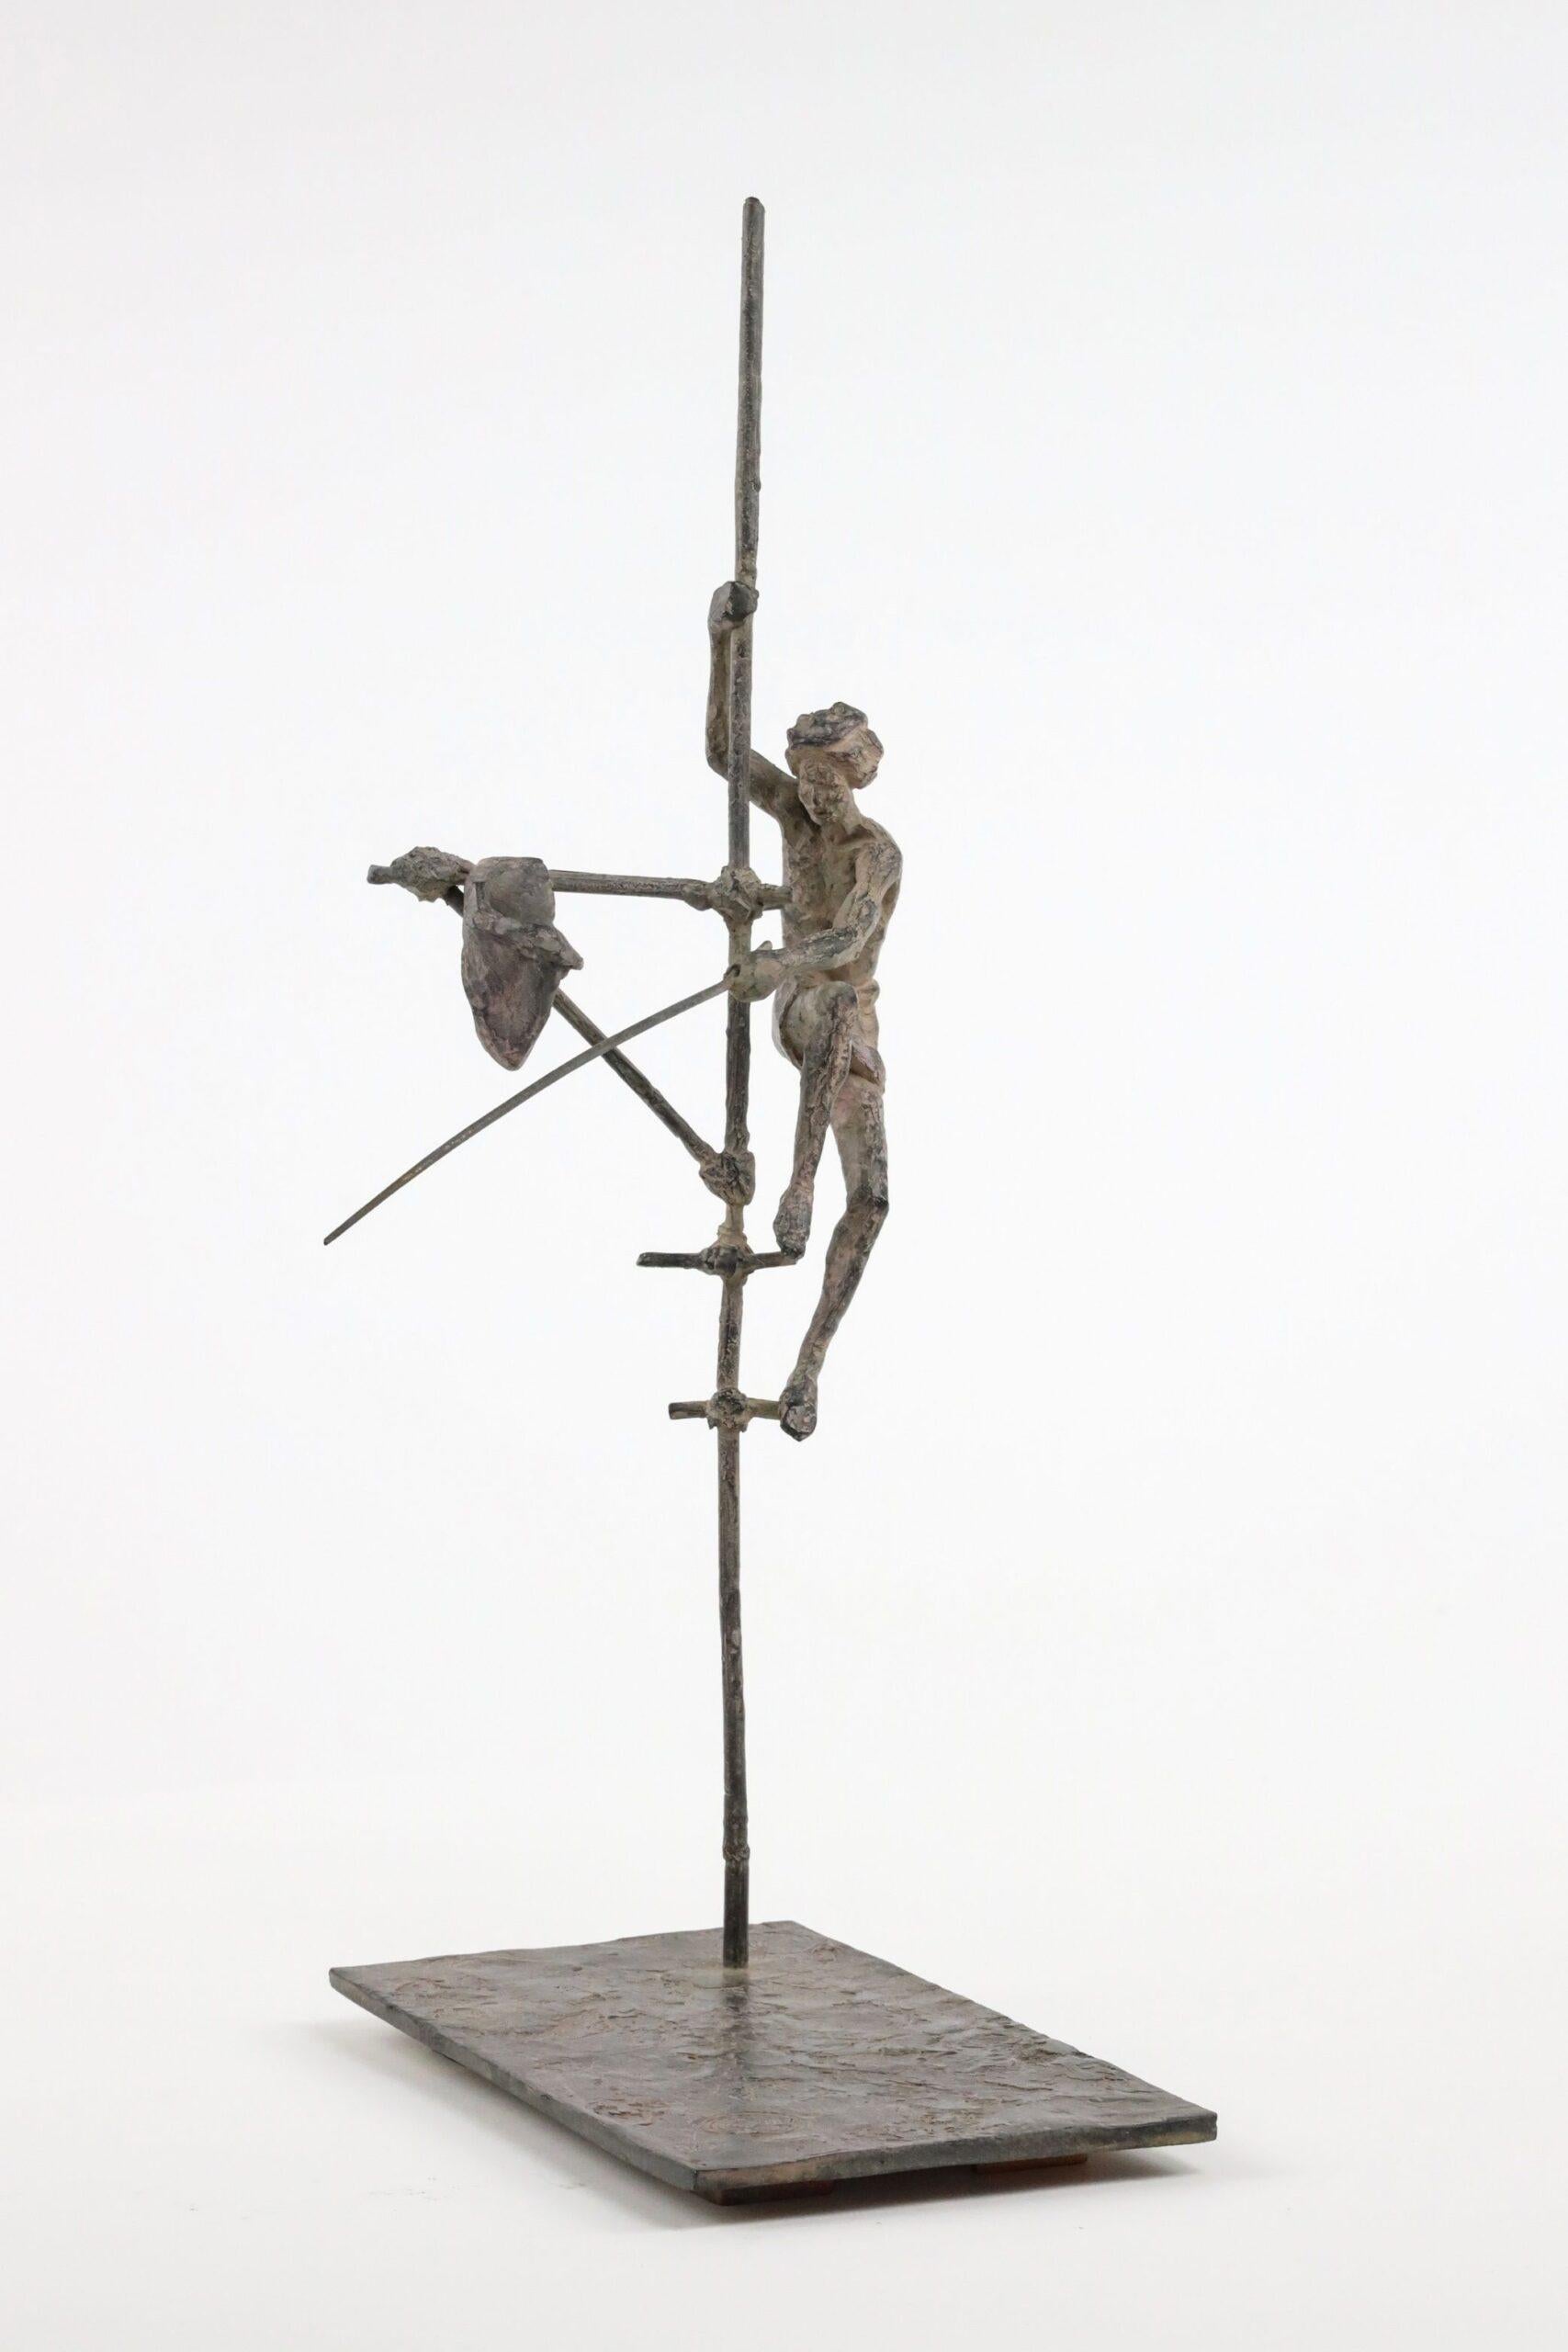 Fisherman on stilt III is a bronze sculpture by French contemporary artist Marine de Soos, dimensions are 45 × 25 × 19 cm (17.7 × 9.8 × 7.5 in). 
The sculpture is signed and numbered, it is part of a limited edition of 8 editions + 4 artist’s